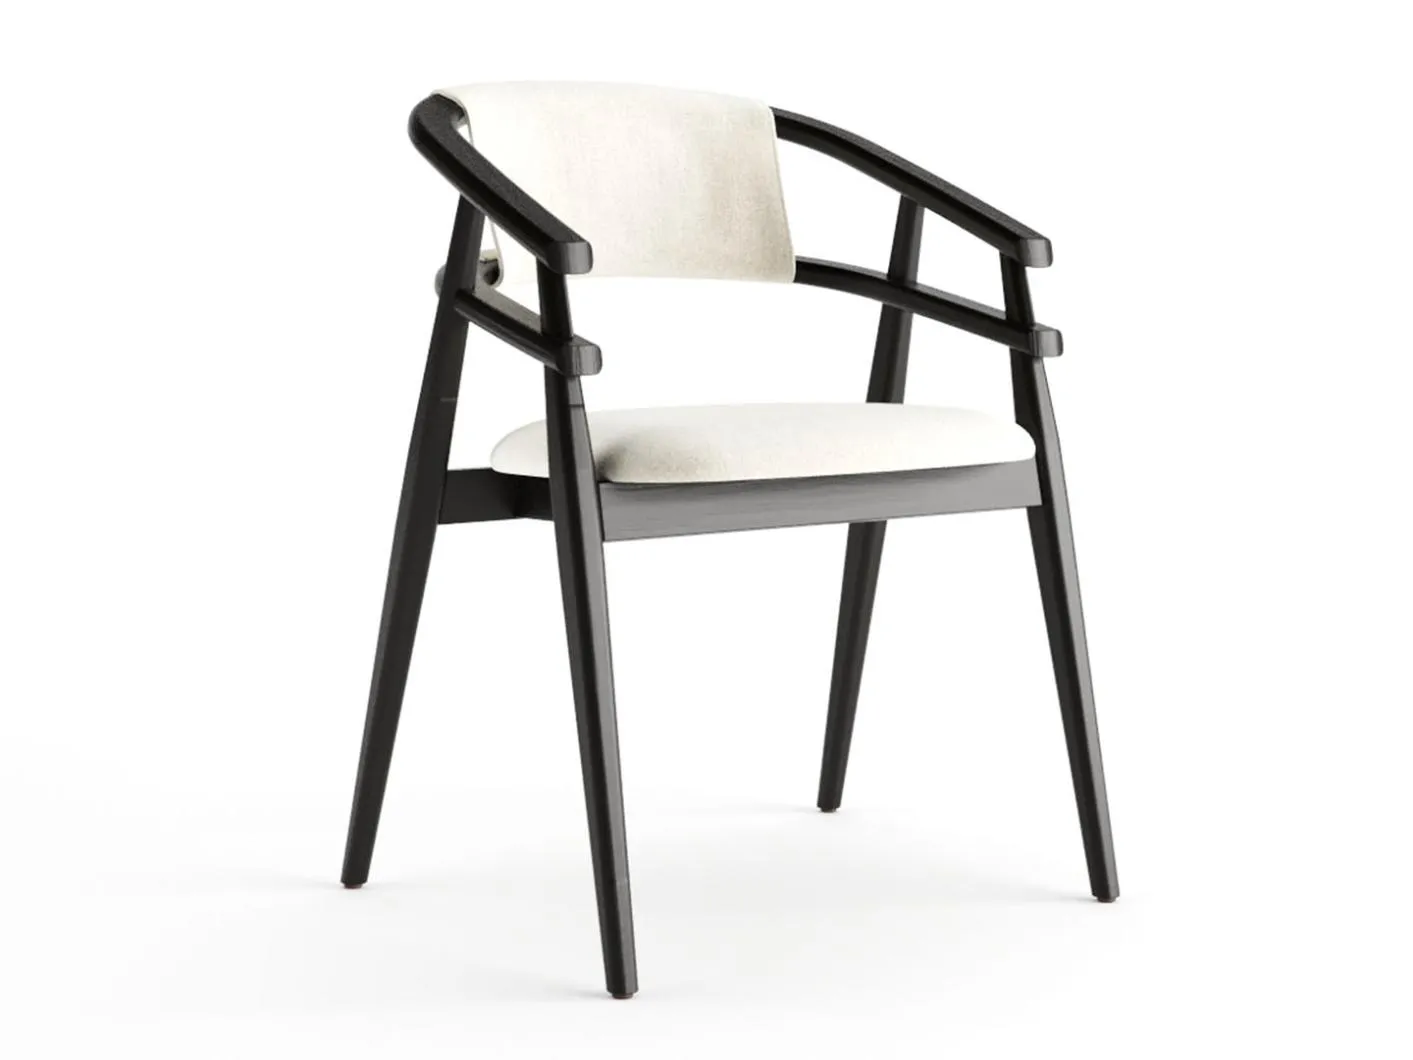 Hulahoop Upholstered Armchair by Area 44